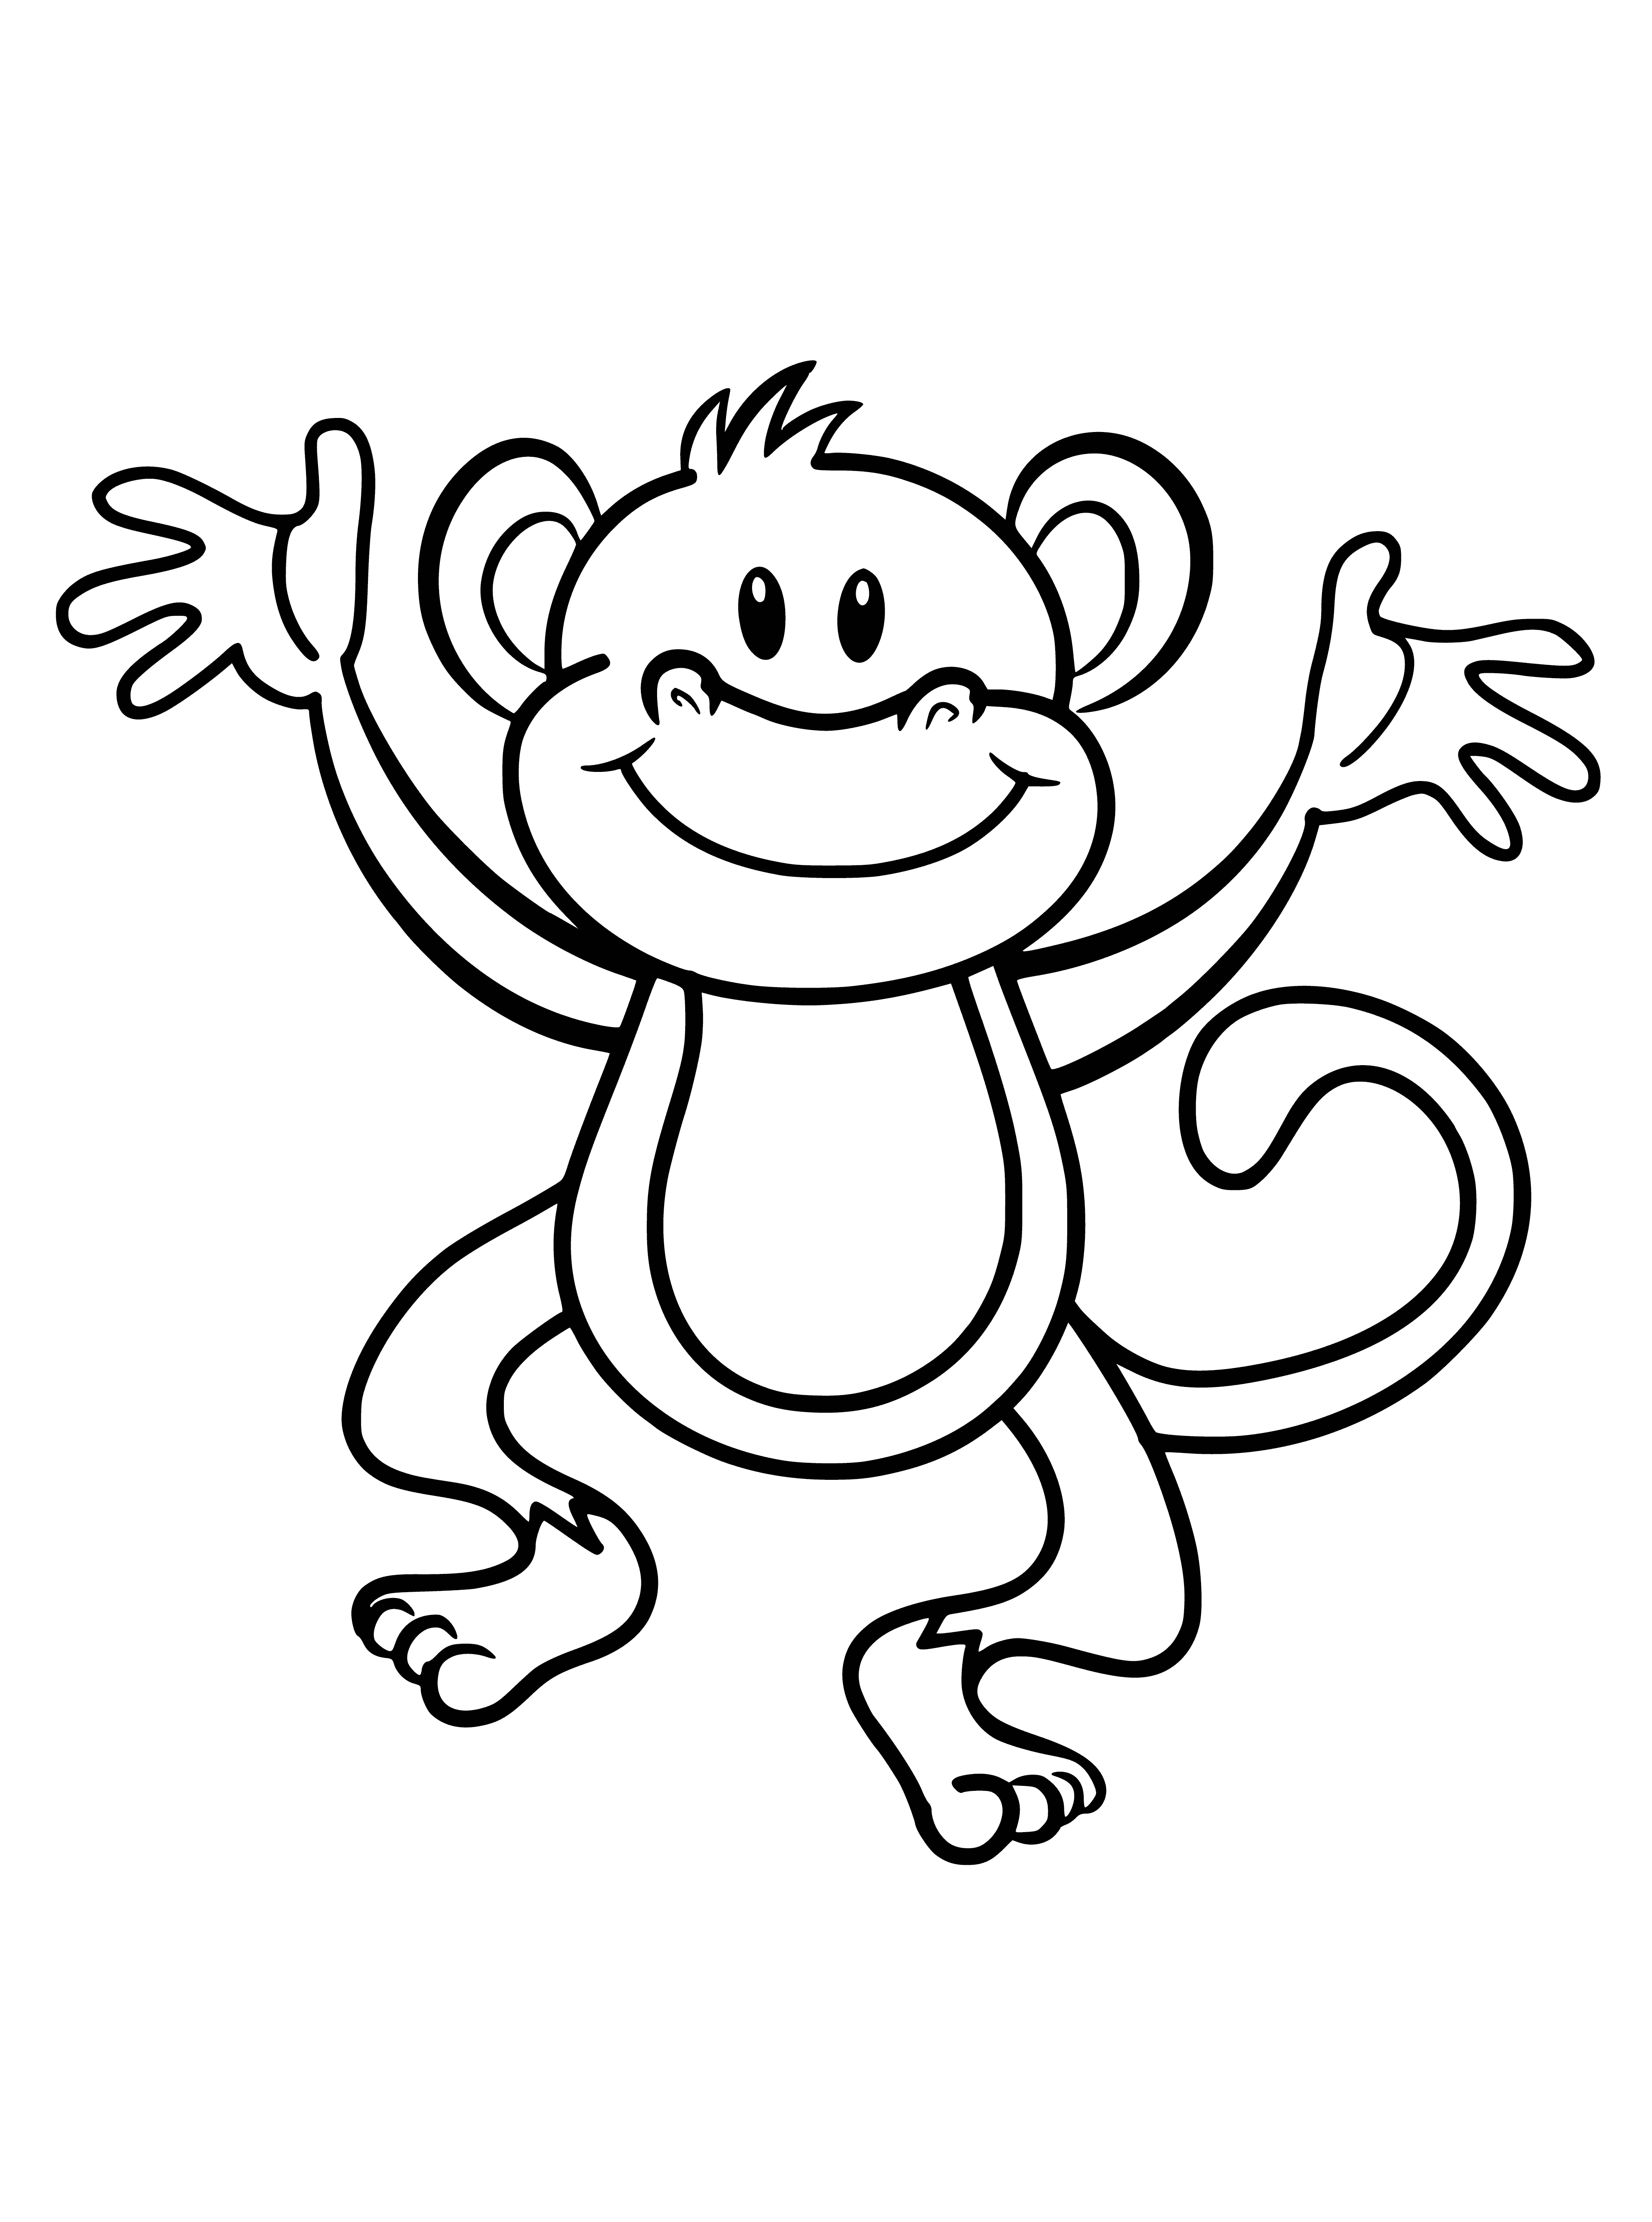 coloring page: Small troop of monkeys huddled in trees; light brown fur, some darker patches, big eyes, small ears, and open mouths showing teeth. Grooming & playing.